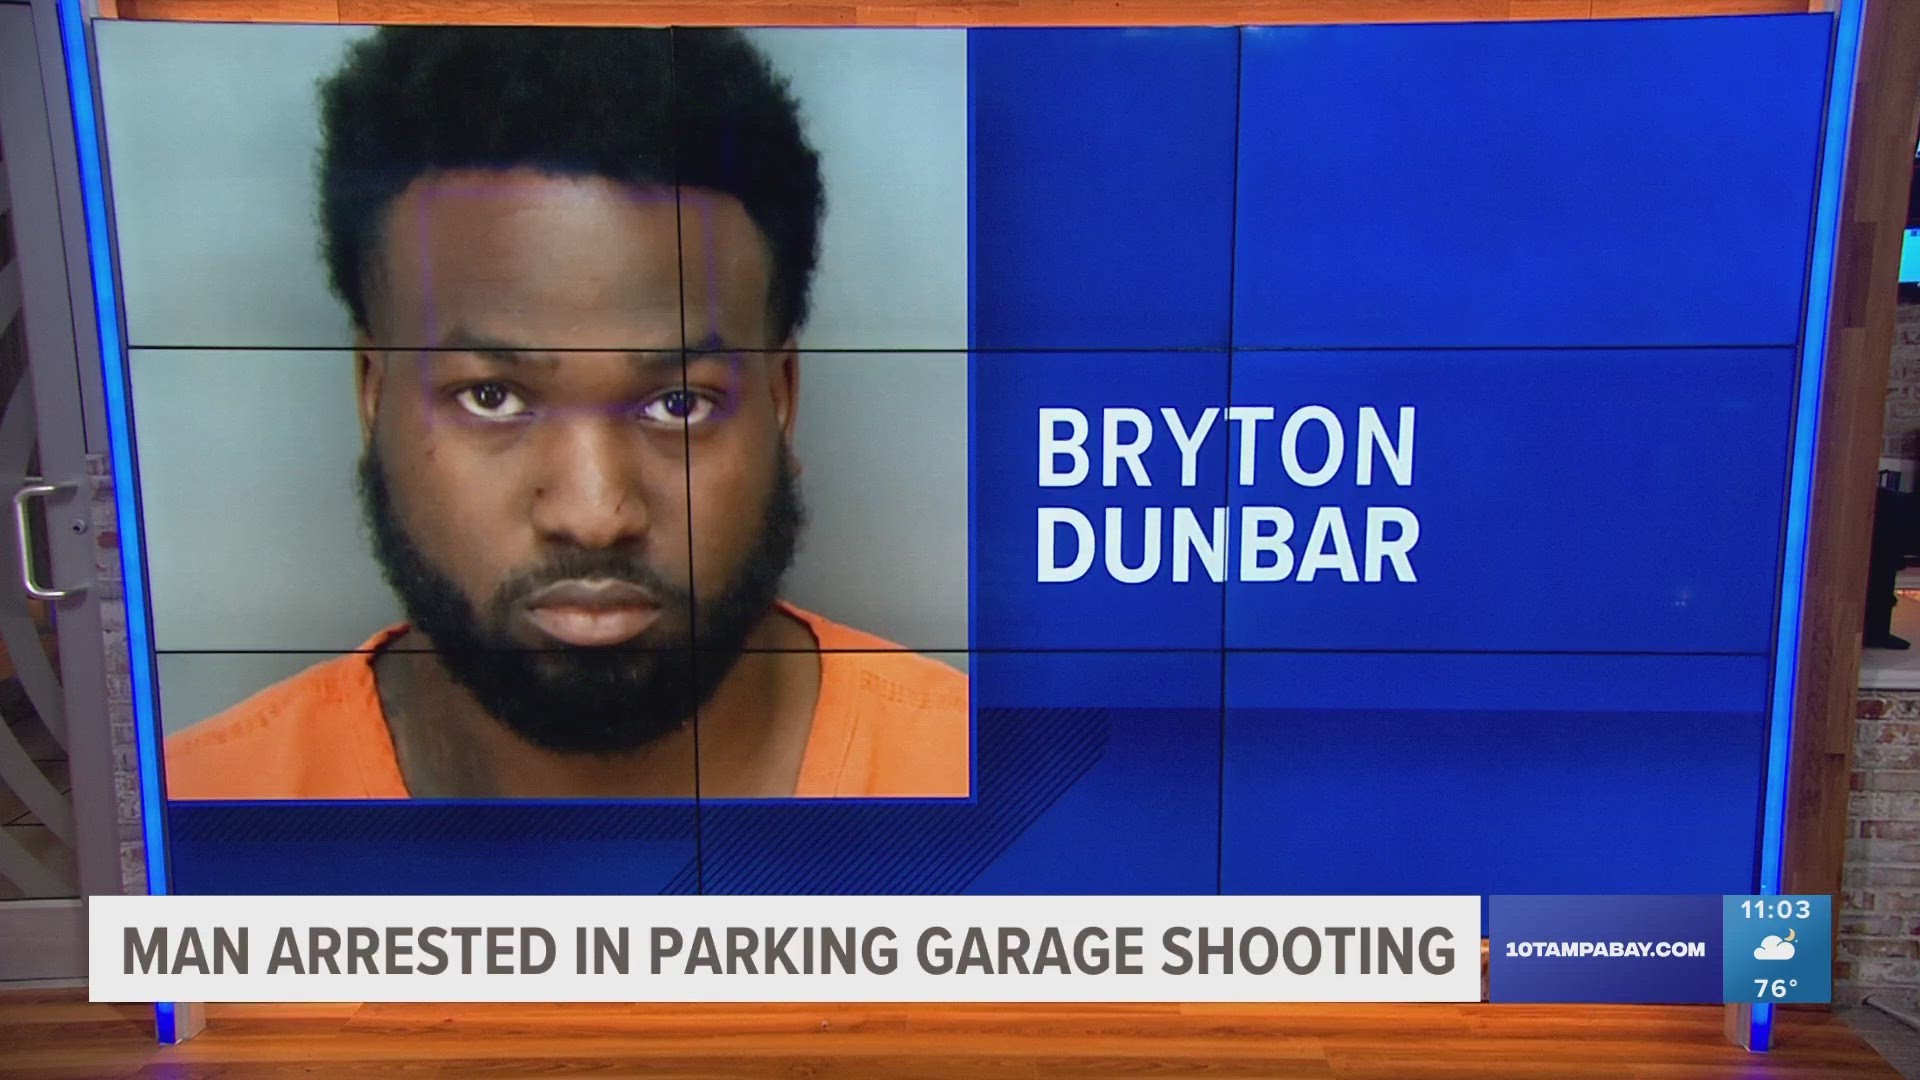 Bryton Dunbar, 31, is facing three counts of attempted homicide.